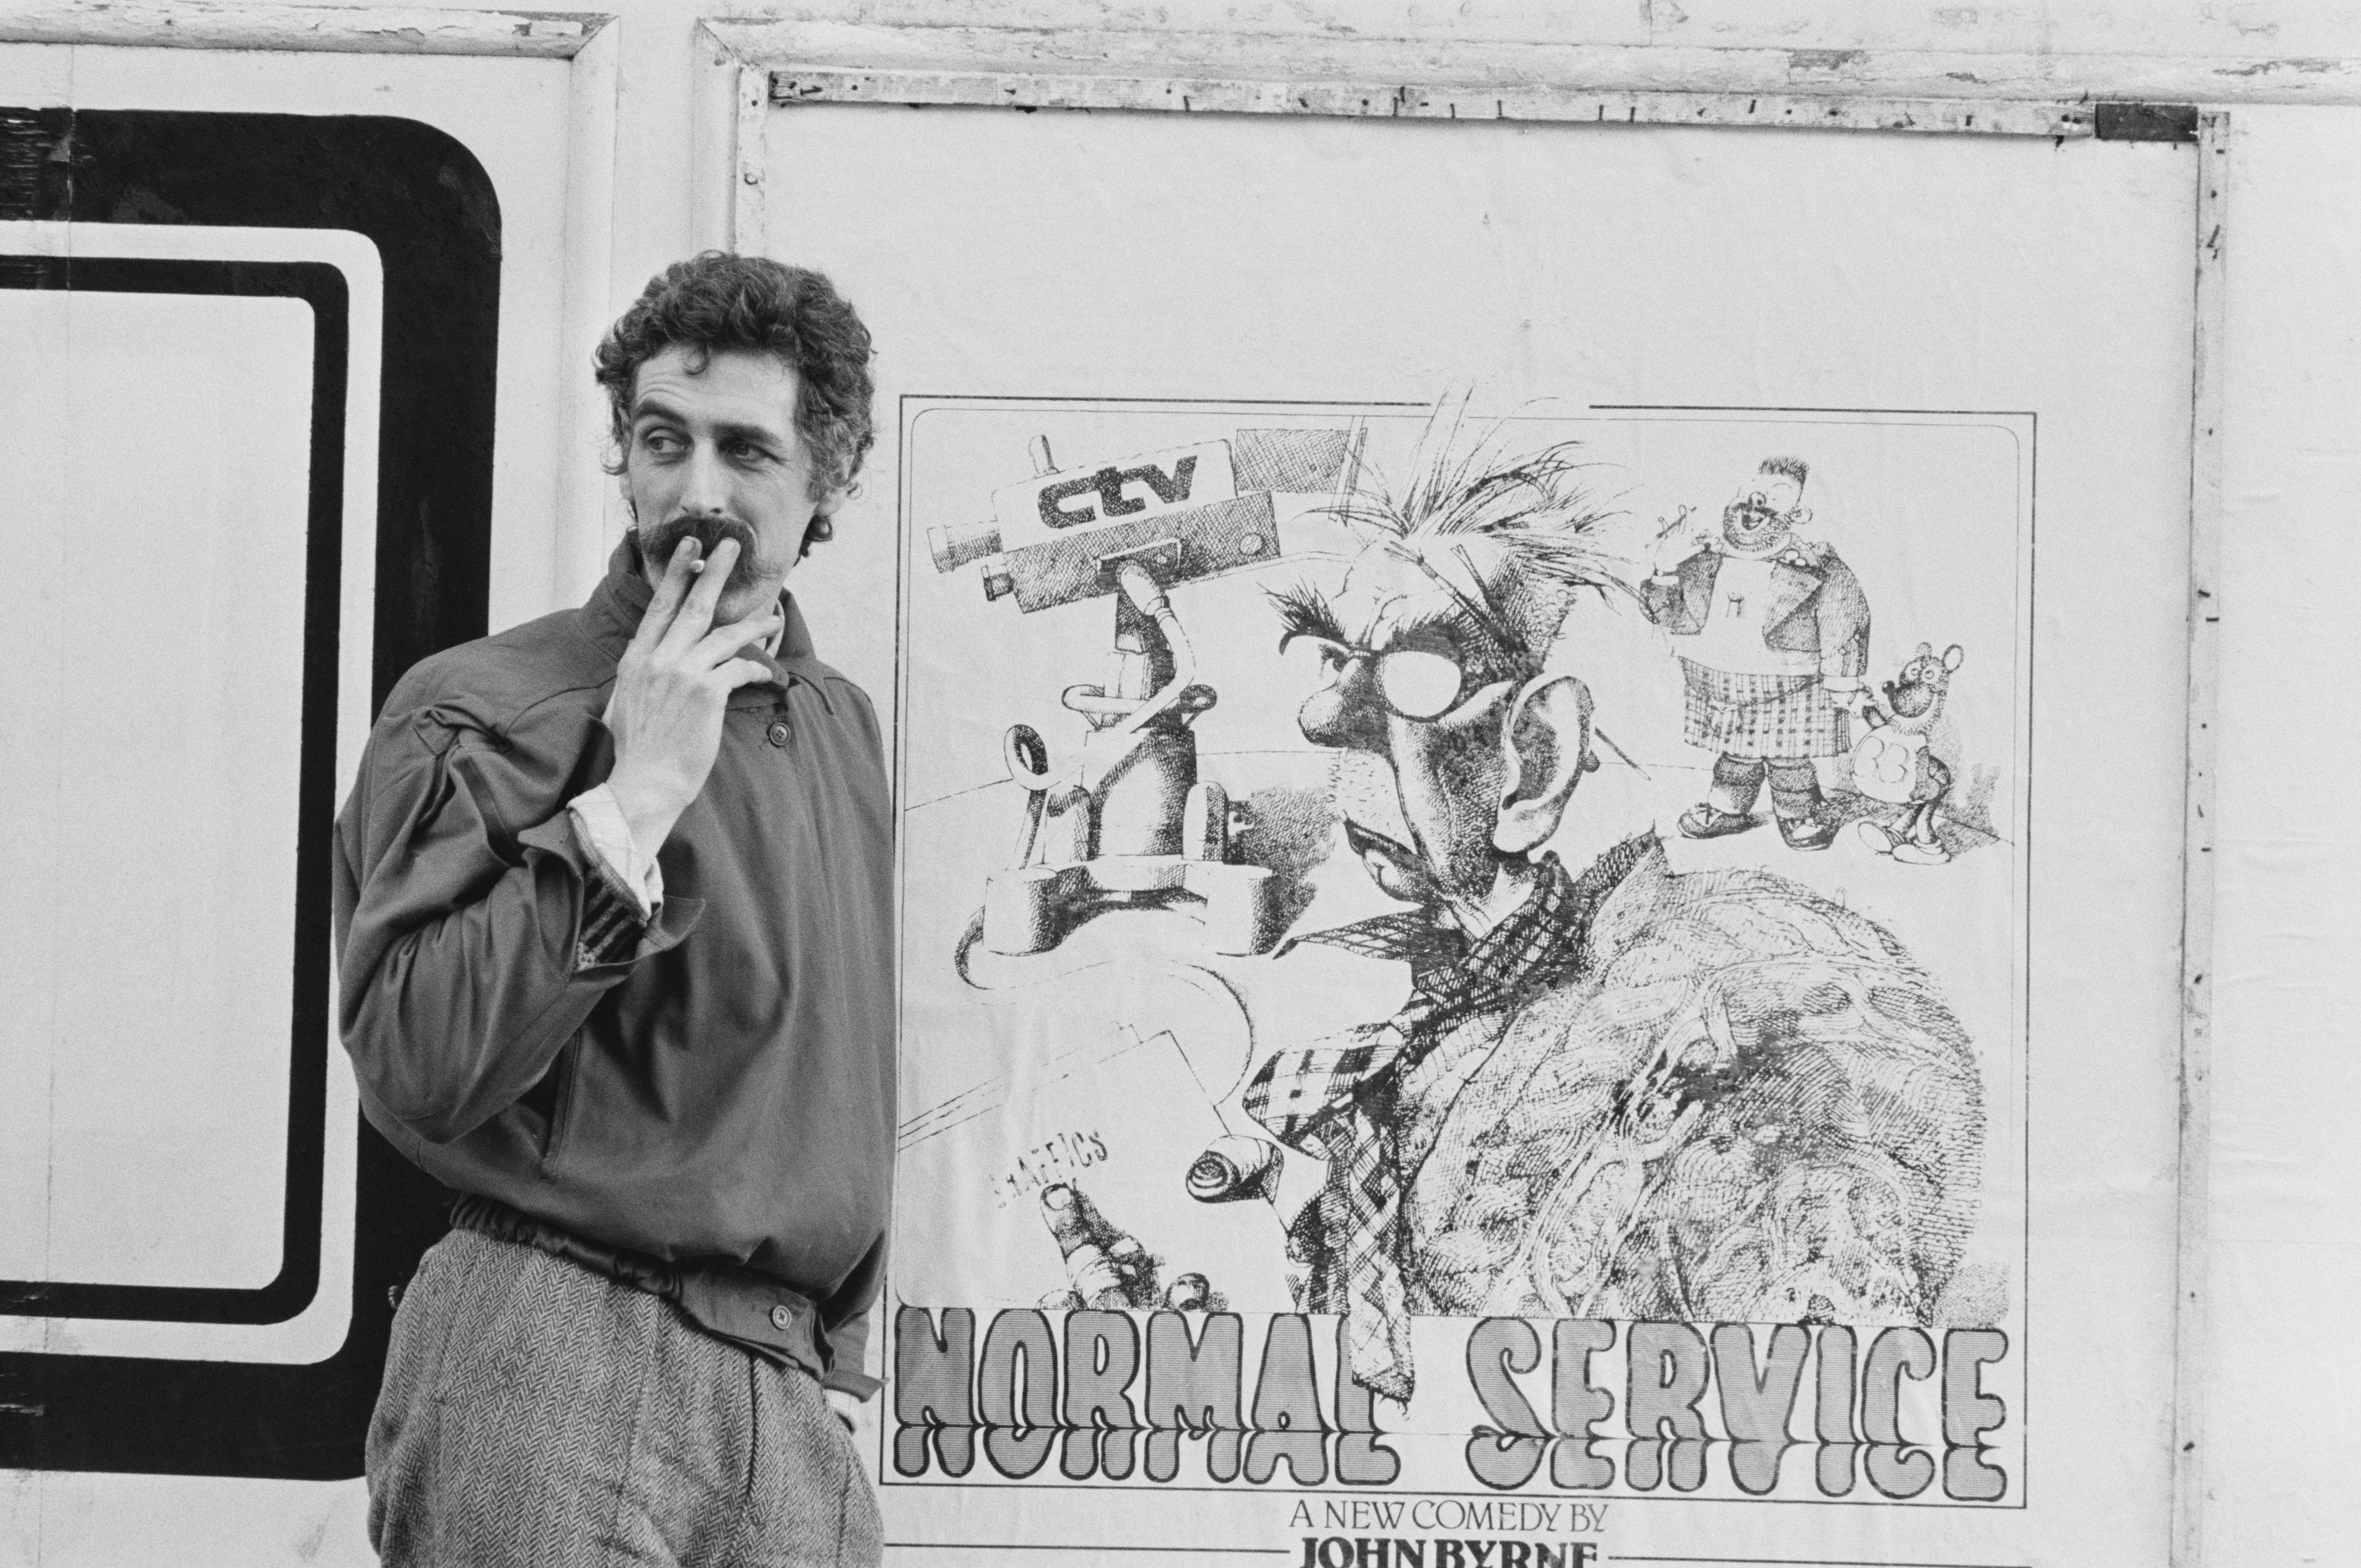 John Byrne with a poster promoting his comedy Normal Service on March 9, 1979.